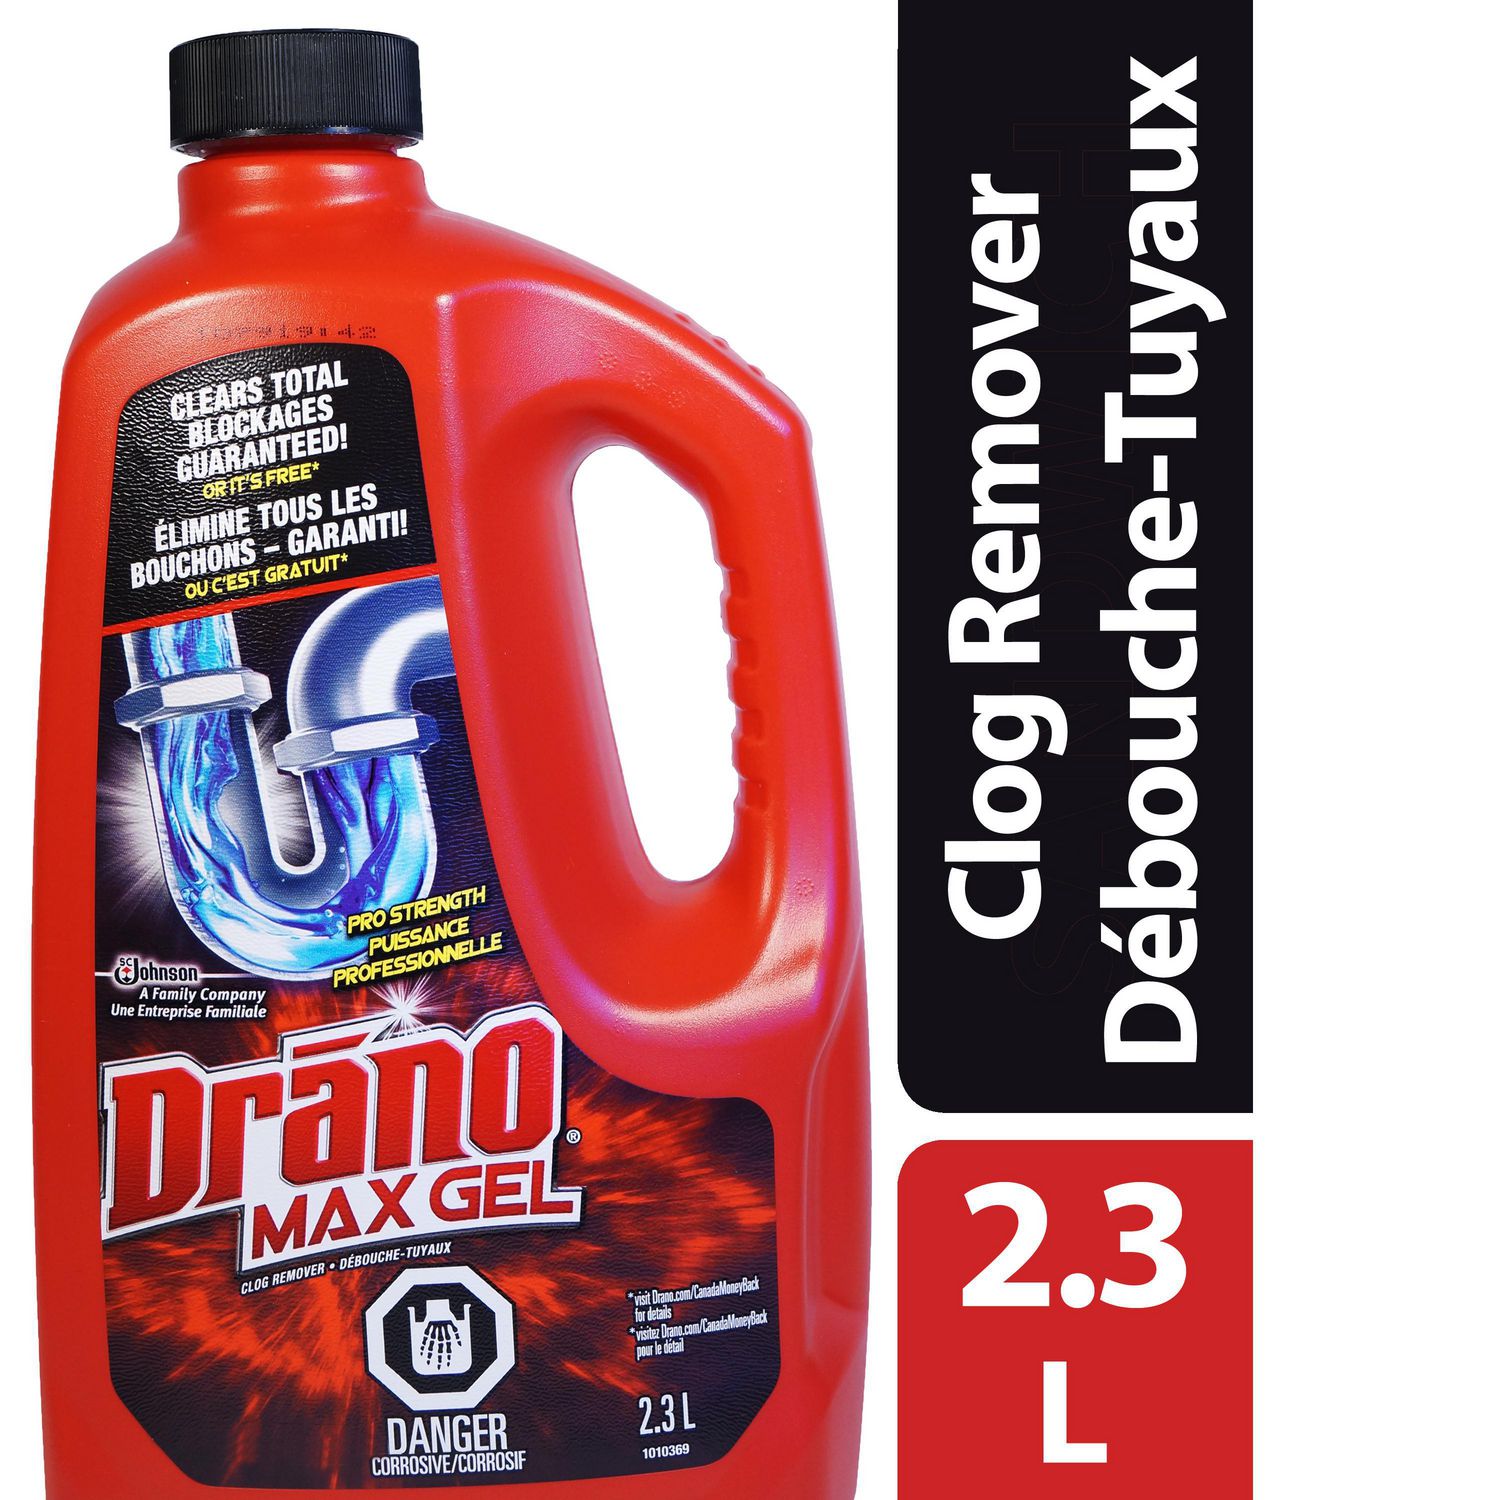 Drano Max Gel Drain Cleaner And Clog, Can Drano Max Gel Be Used In Bathtub